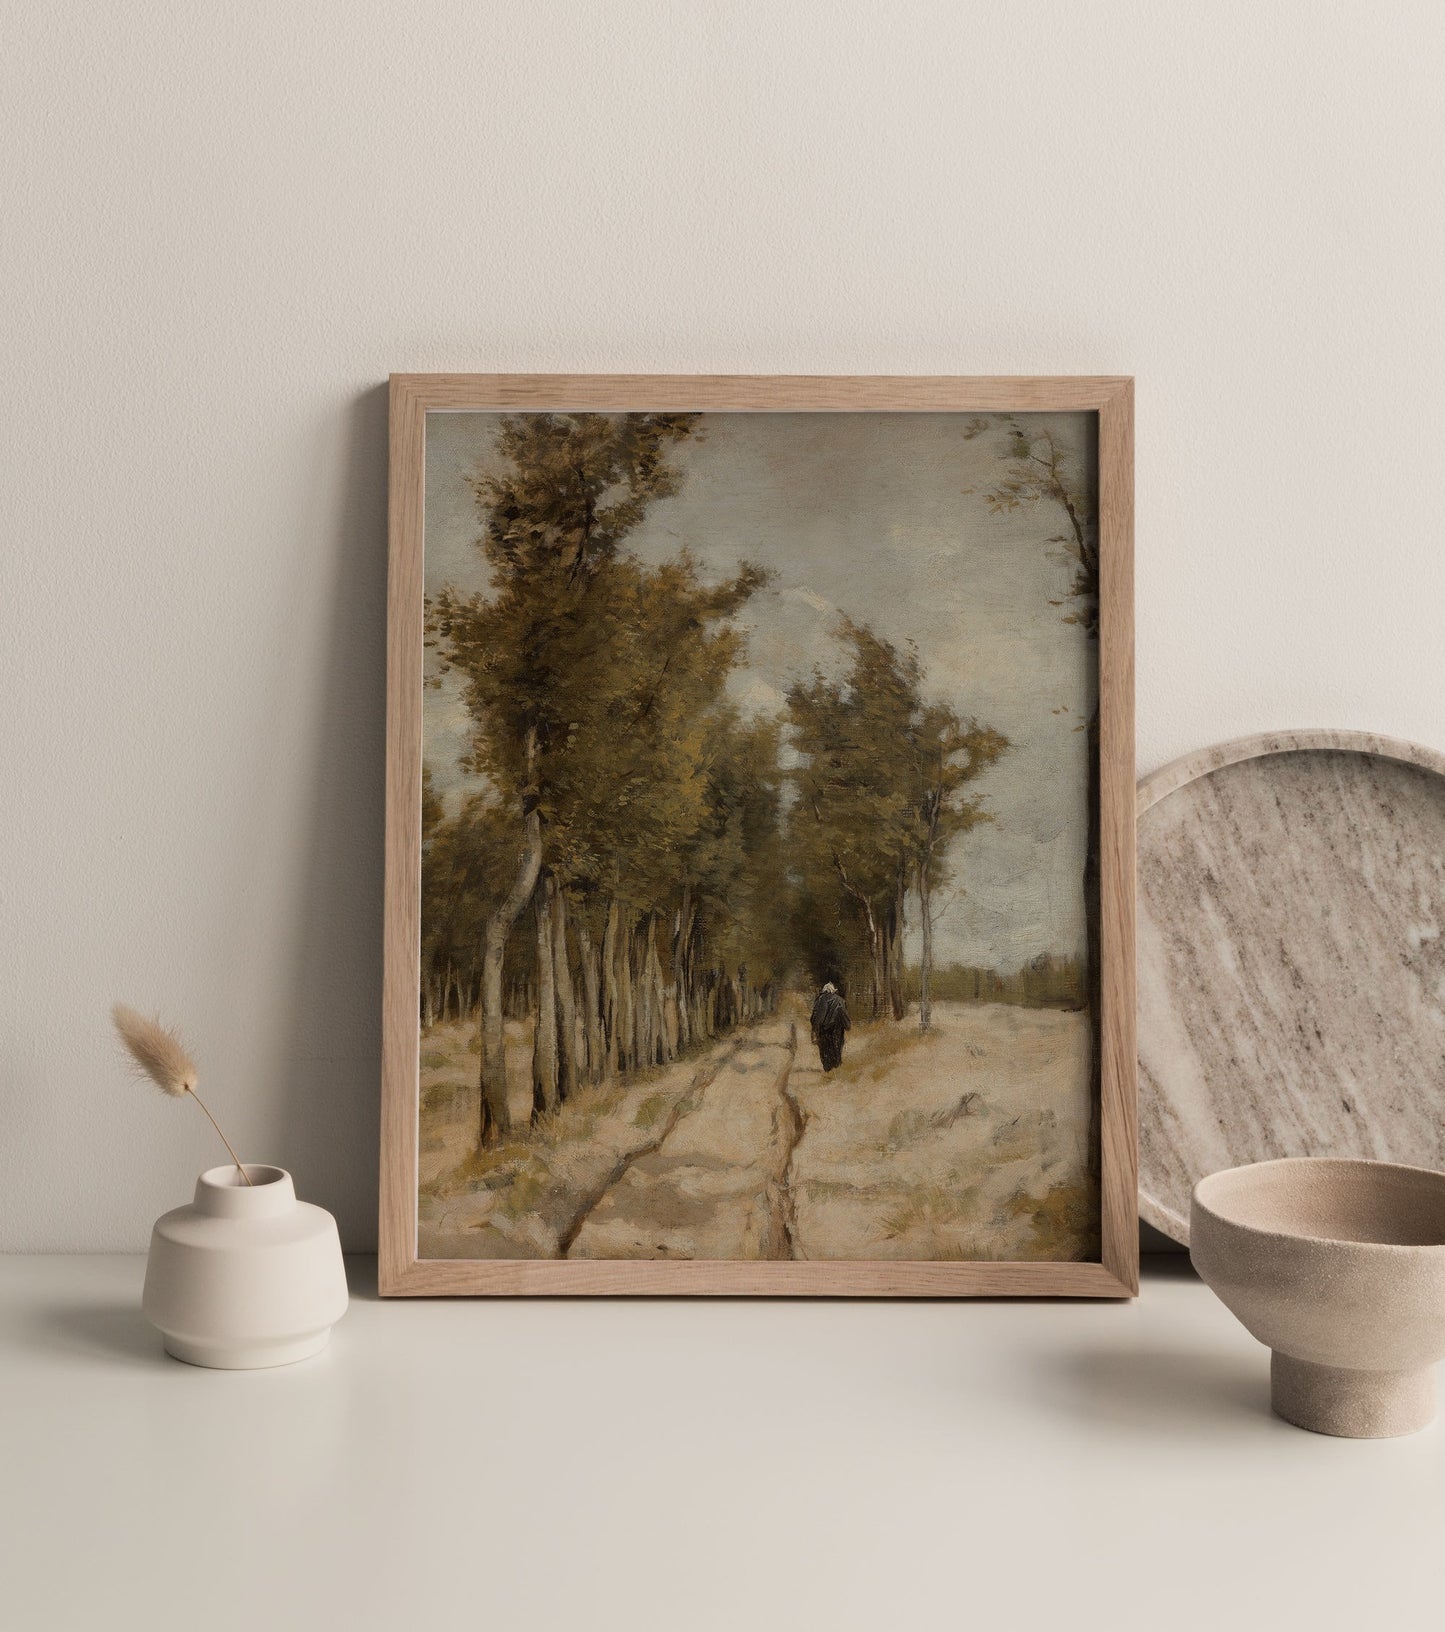 Vintage Digital Oil Painting Wall Art - Printed and Shipped to you - Quiet Walk on a Path